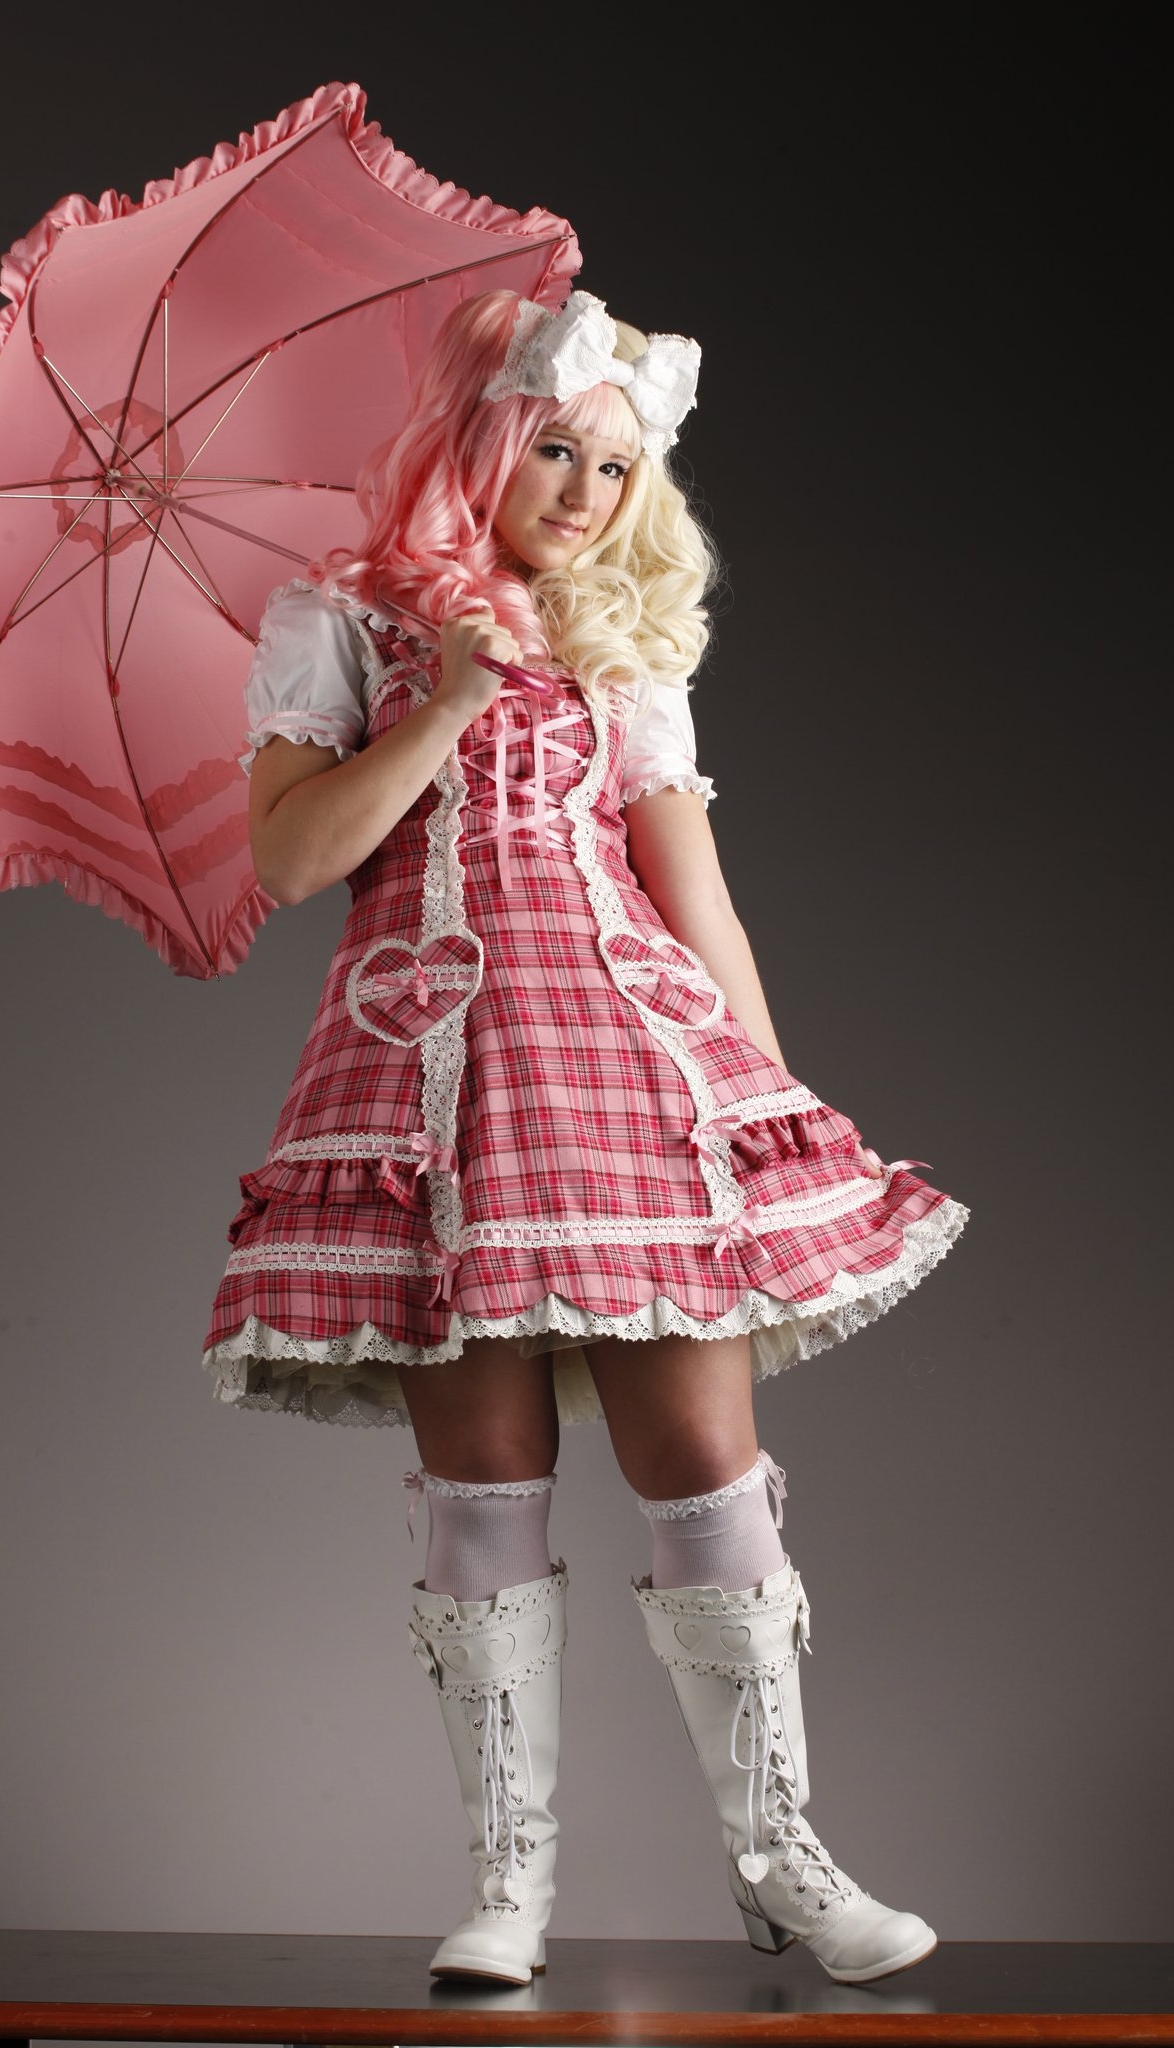 Lolita with Pink and Blond Hair wearing White Opaque Stockings and White Boots